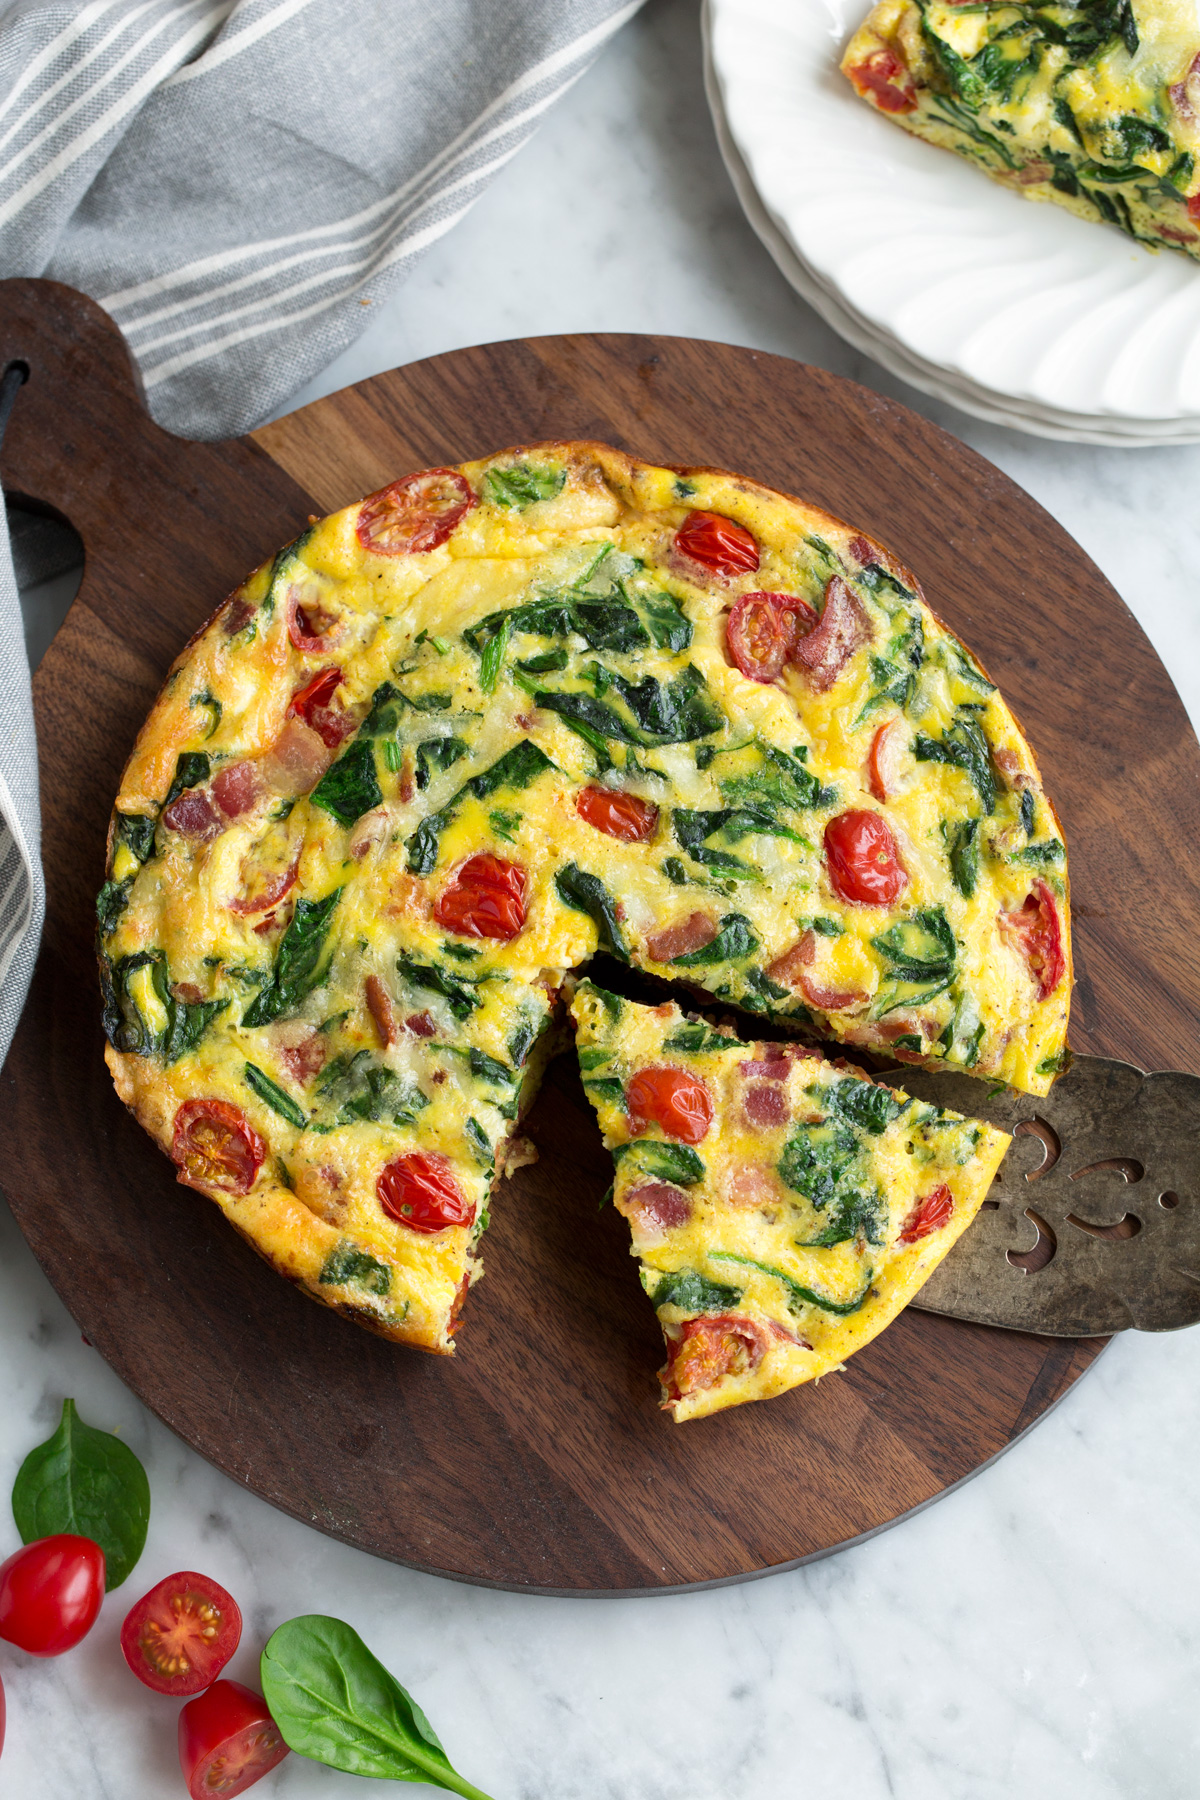 Sliced frittata on a wooden surface.